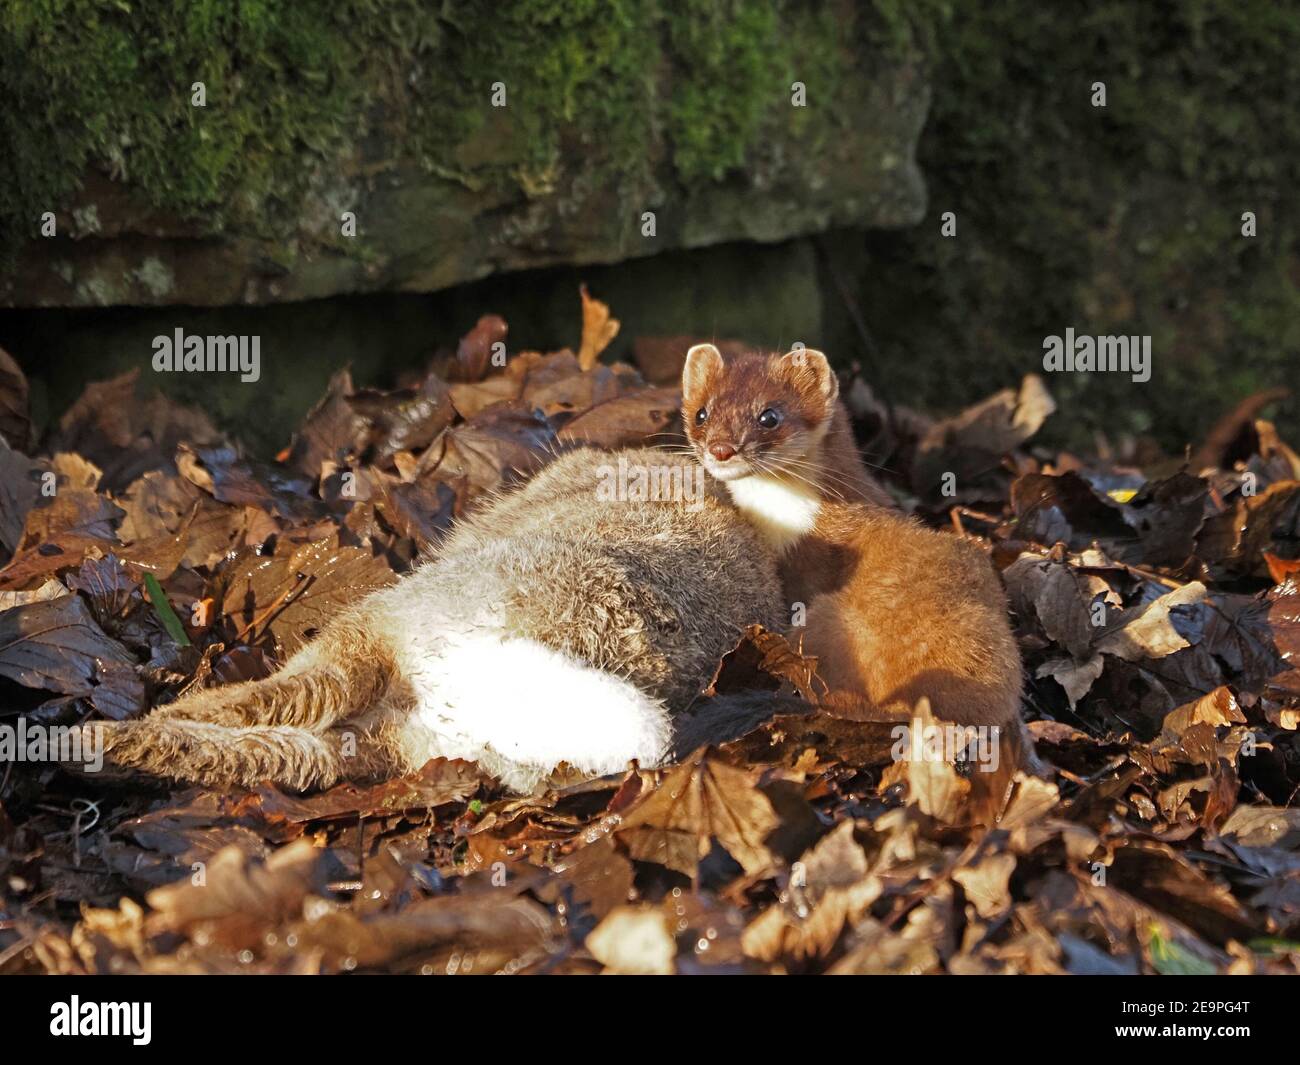 Fierce little hunter - bright-eyed & lithe Stoat (Mustela erminea) dwarfed by large rabbit kill in mossy undergrowth in rural Cumbria, England, UK Stock Photo